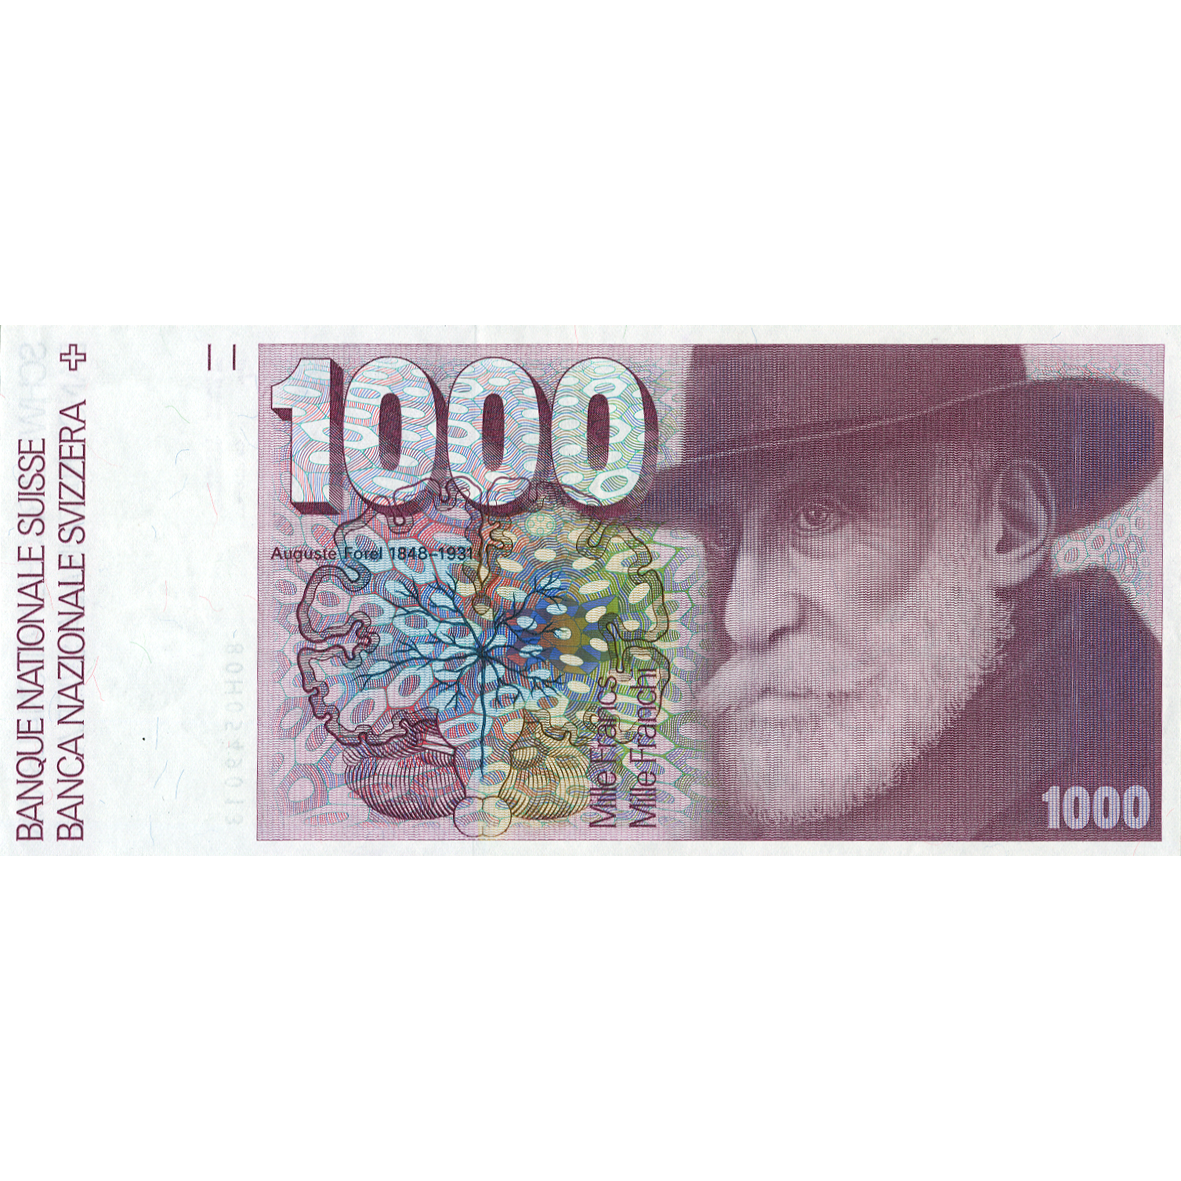 Swiss Confederation, 1000 Franks 1980, 6th Banknote Series, in Circulation 1976-2000 (obverse)